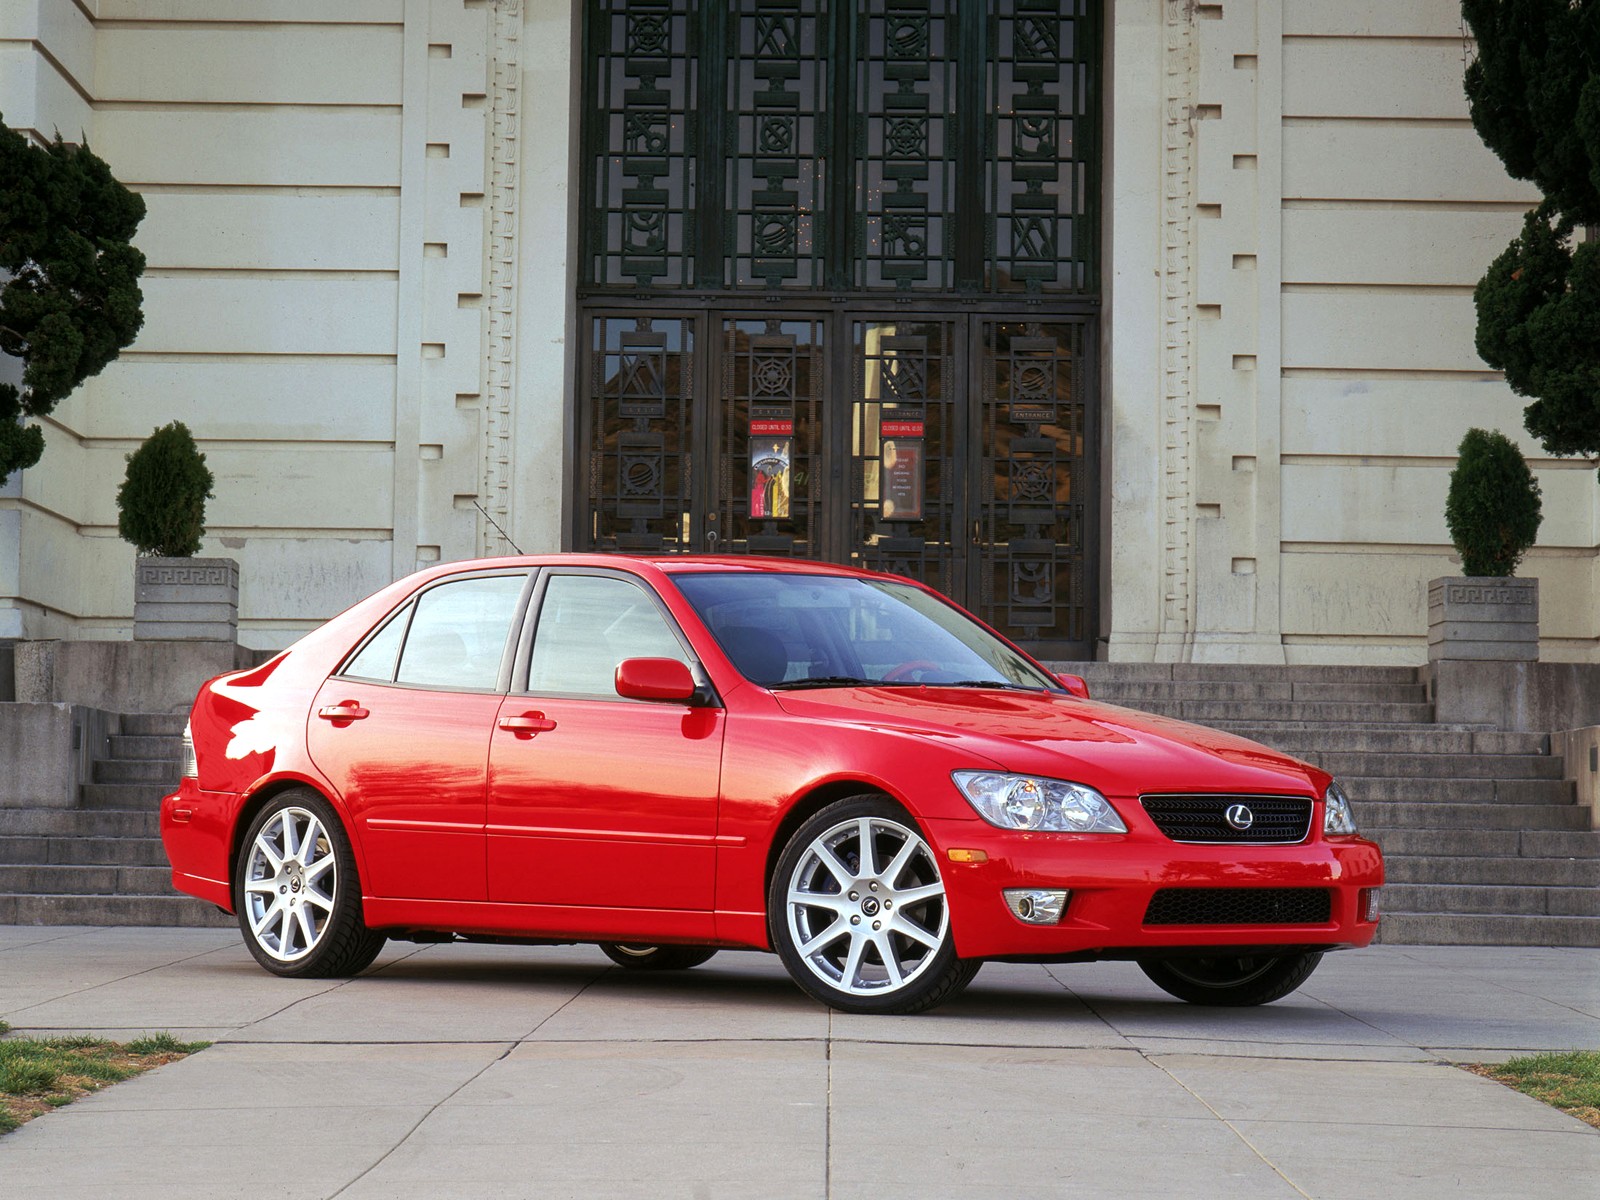 You can vote for this Lexus IS 300 photo